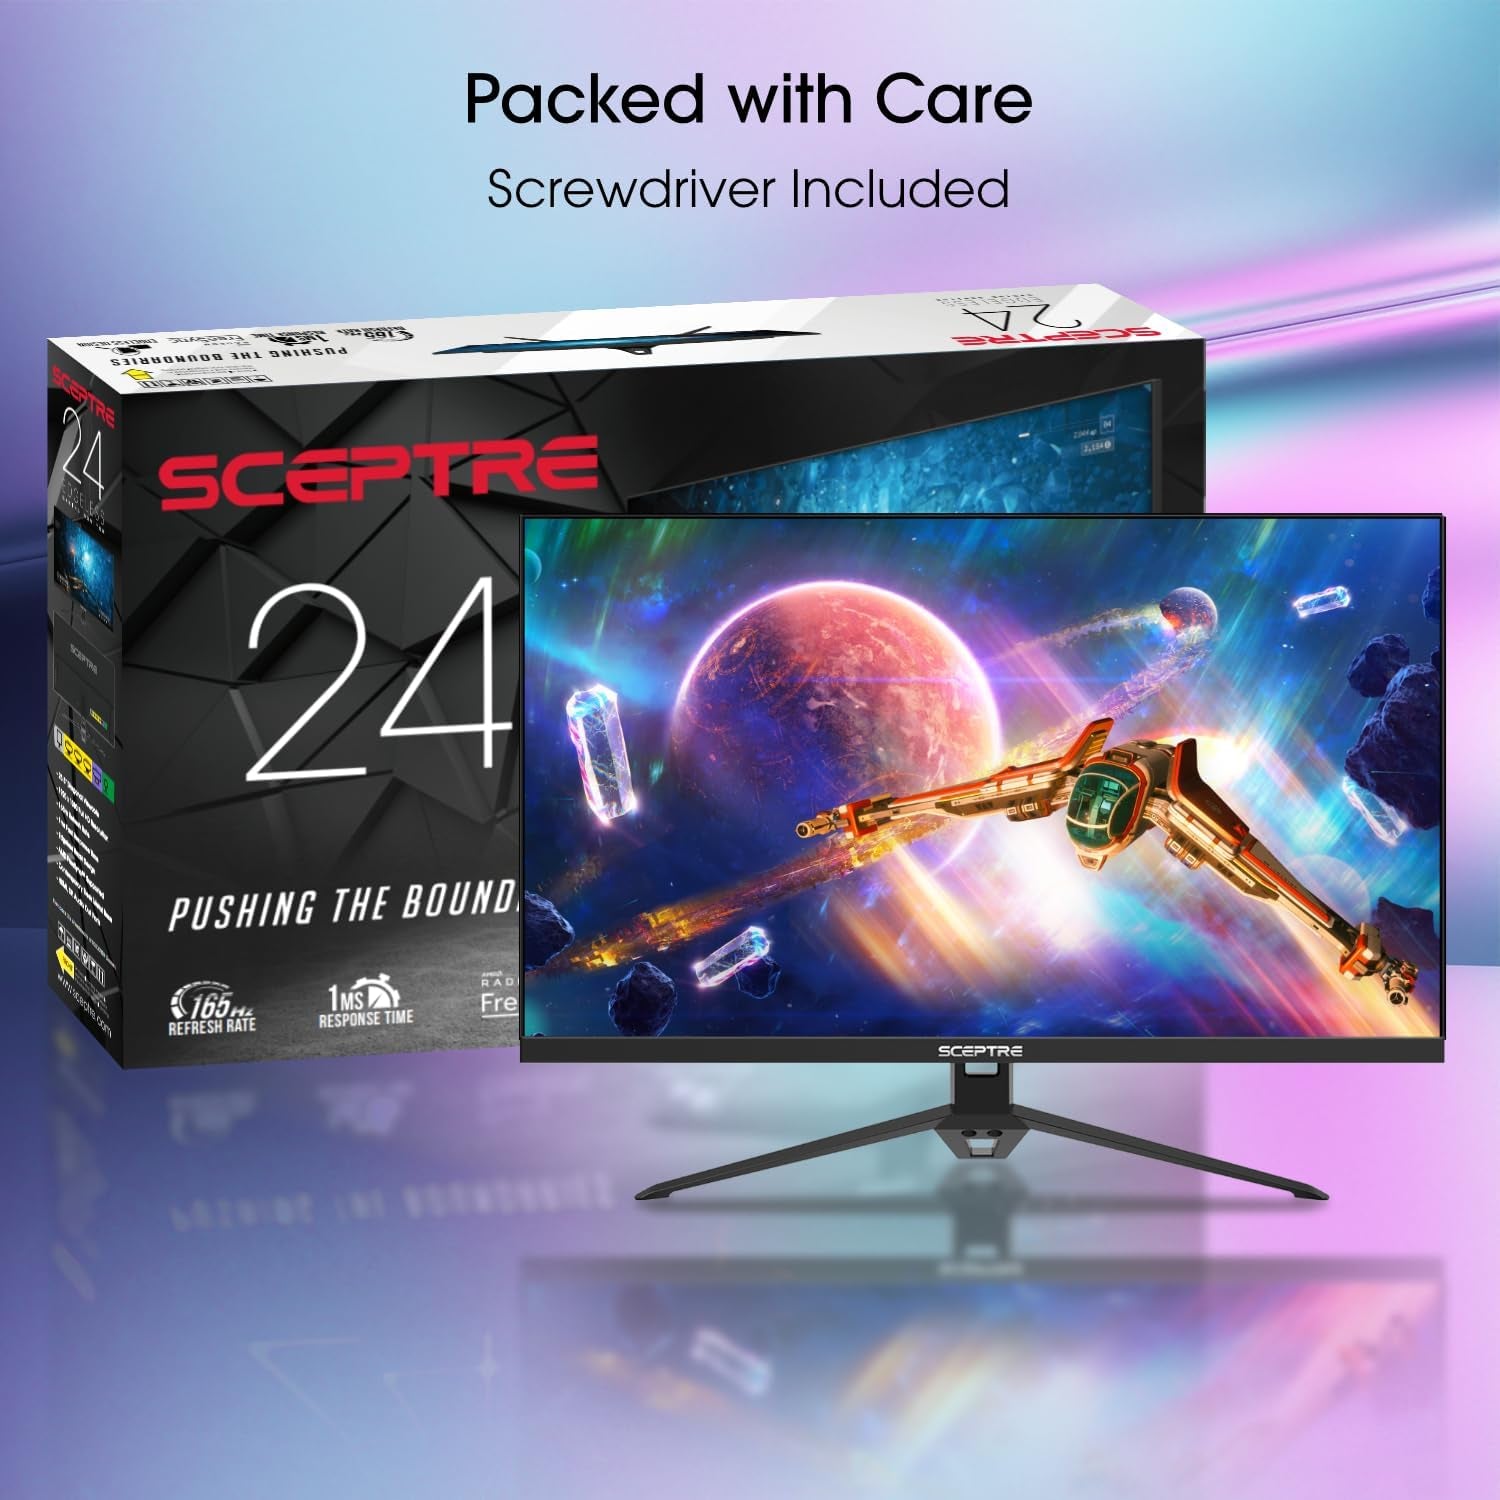 IPS 24" 165Hz Gaming Monitor - Immerse Yourself in Full HD Gaming Bliss with Freesync, Eye Care, and More!